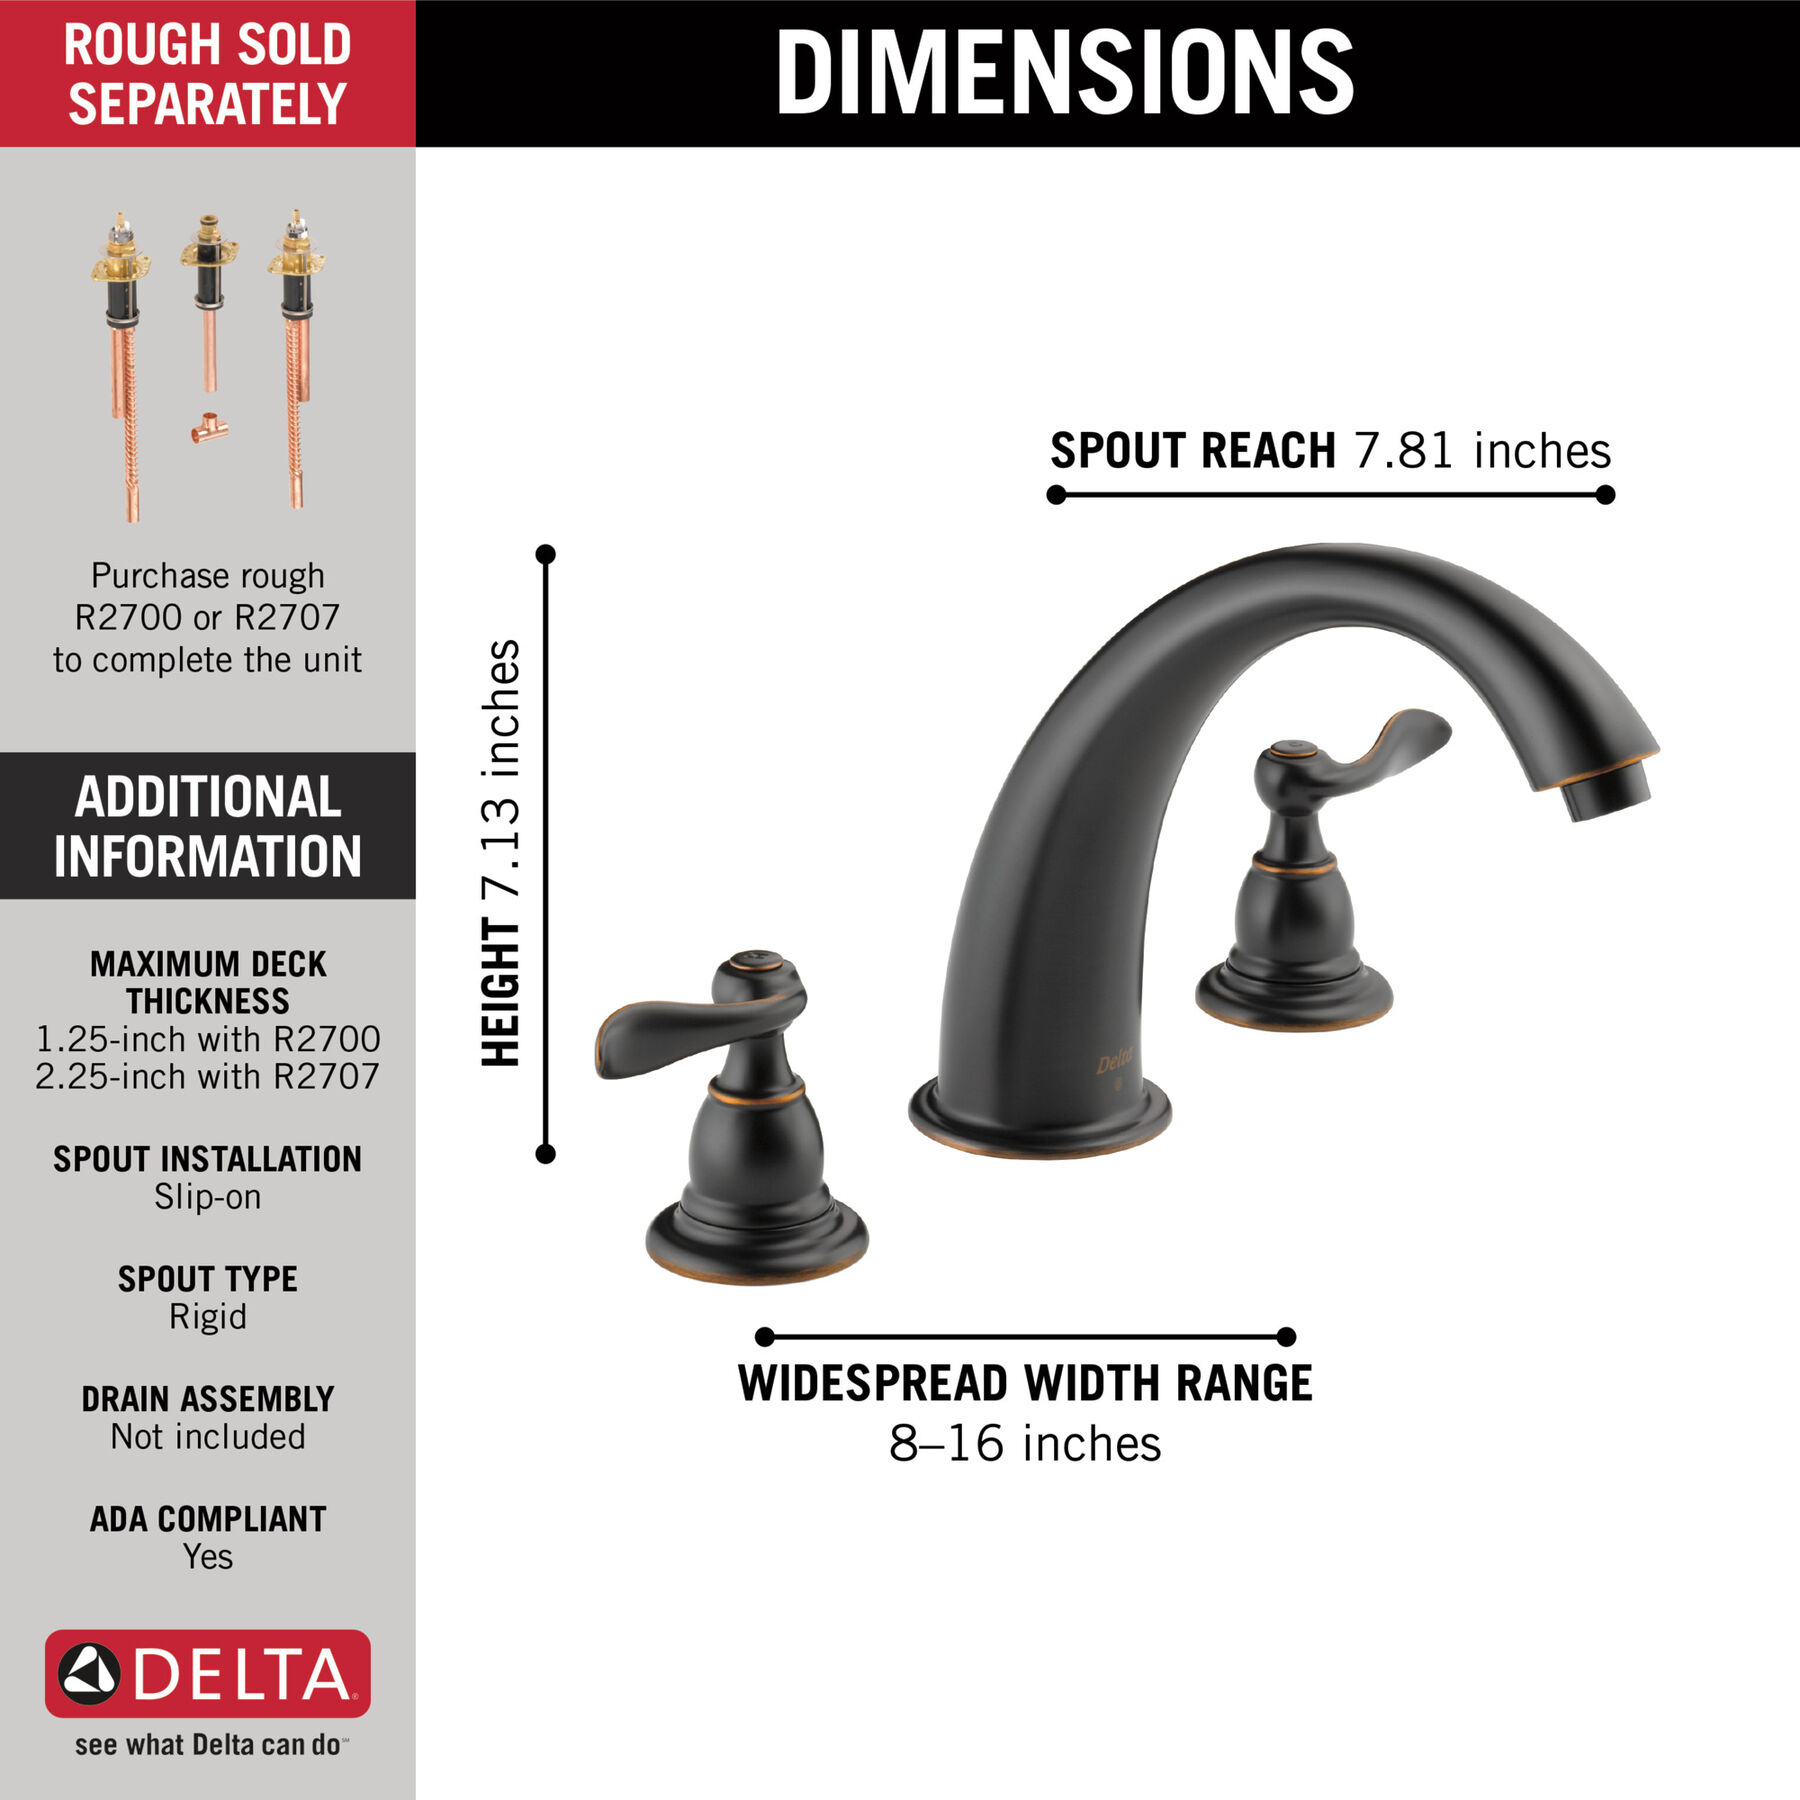 Delta Faucet Classic 2-Handle Widespread Roman Tub Faucet, Brushed Nickel Tub  Faucet, Roman Bathtub Faucet, Delta Roman Tub Faucet, Tub Filler, Stainless  T2705-SS (Valve Not Included) - Tub Filler Faucets 